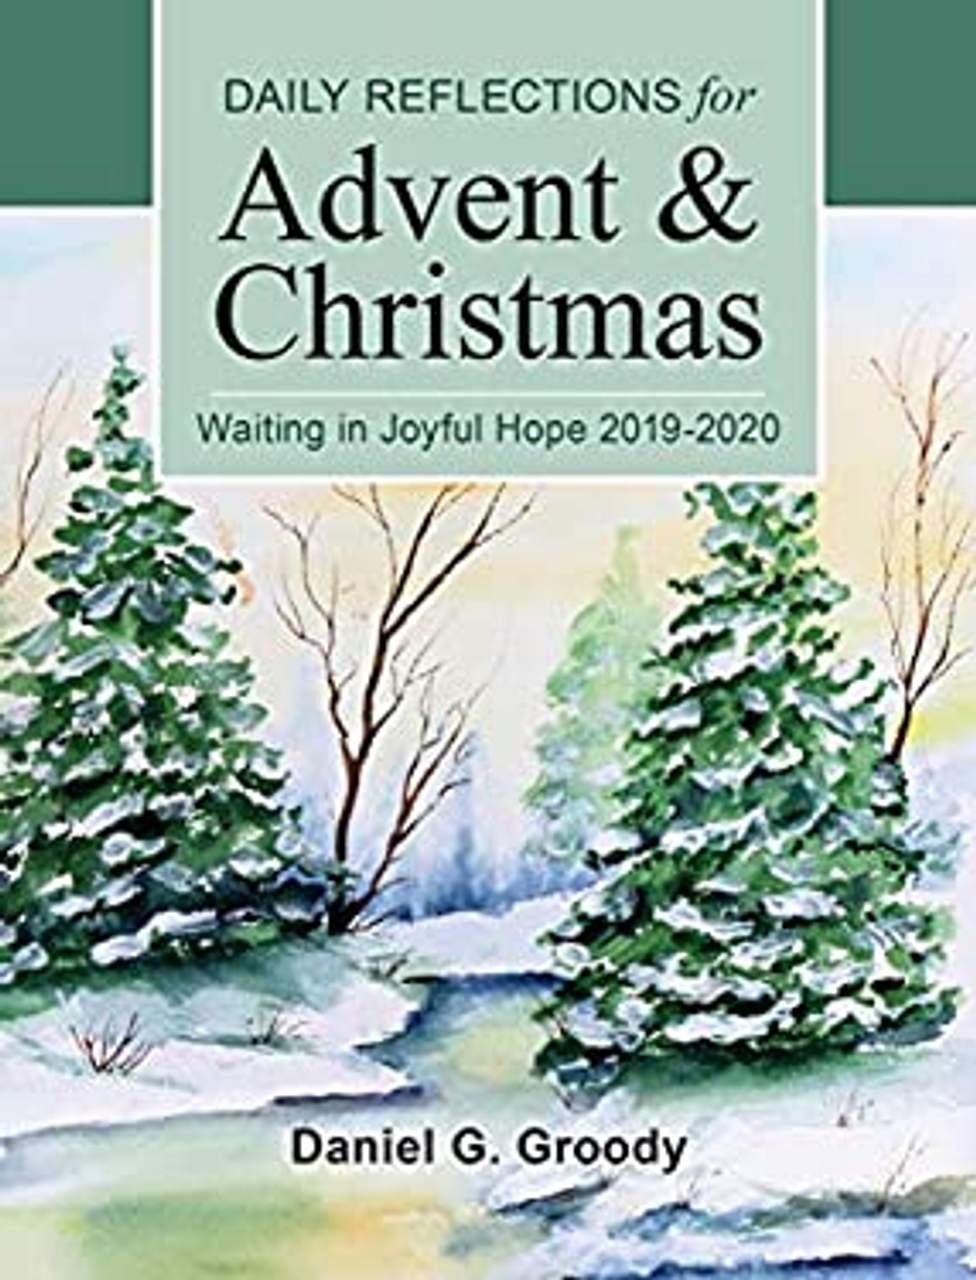 Daily Reflections for Advent & Christmas by Daniel G. Groody